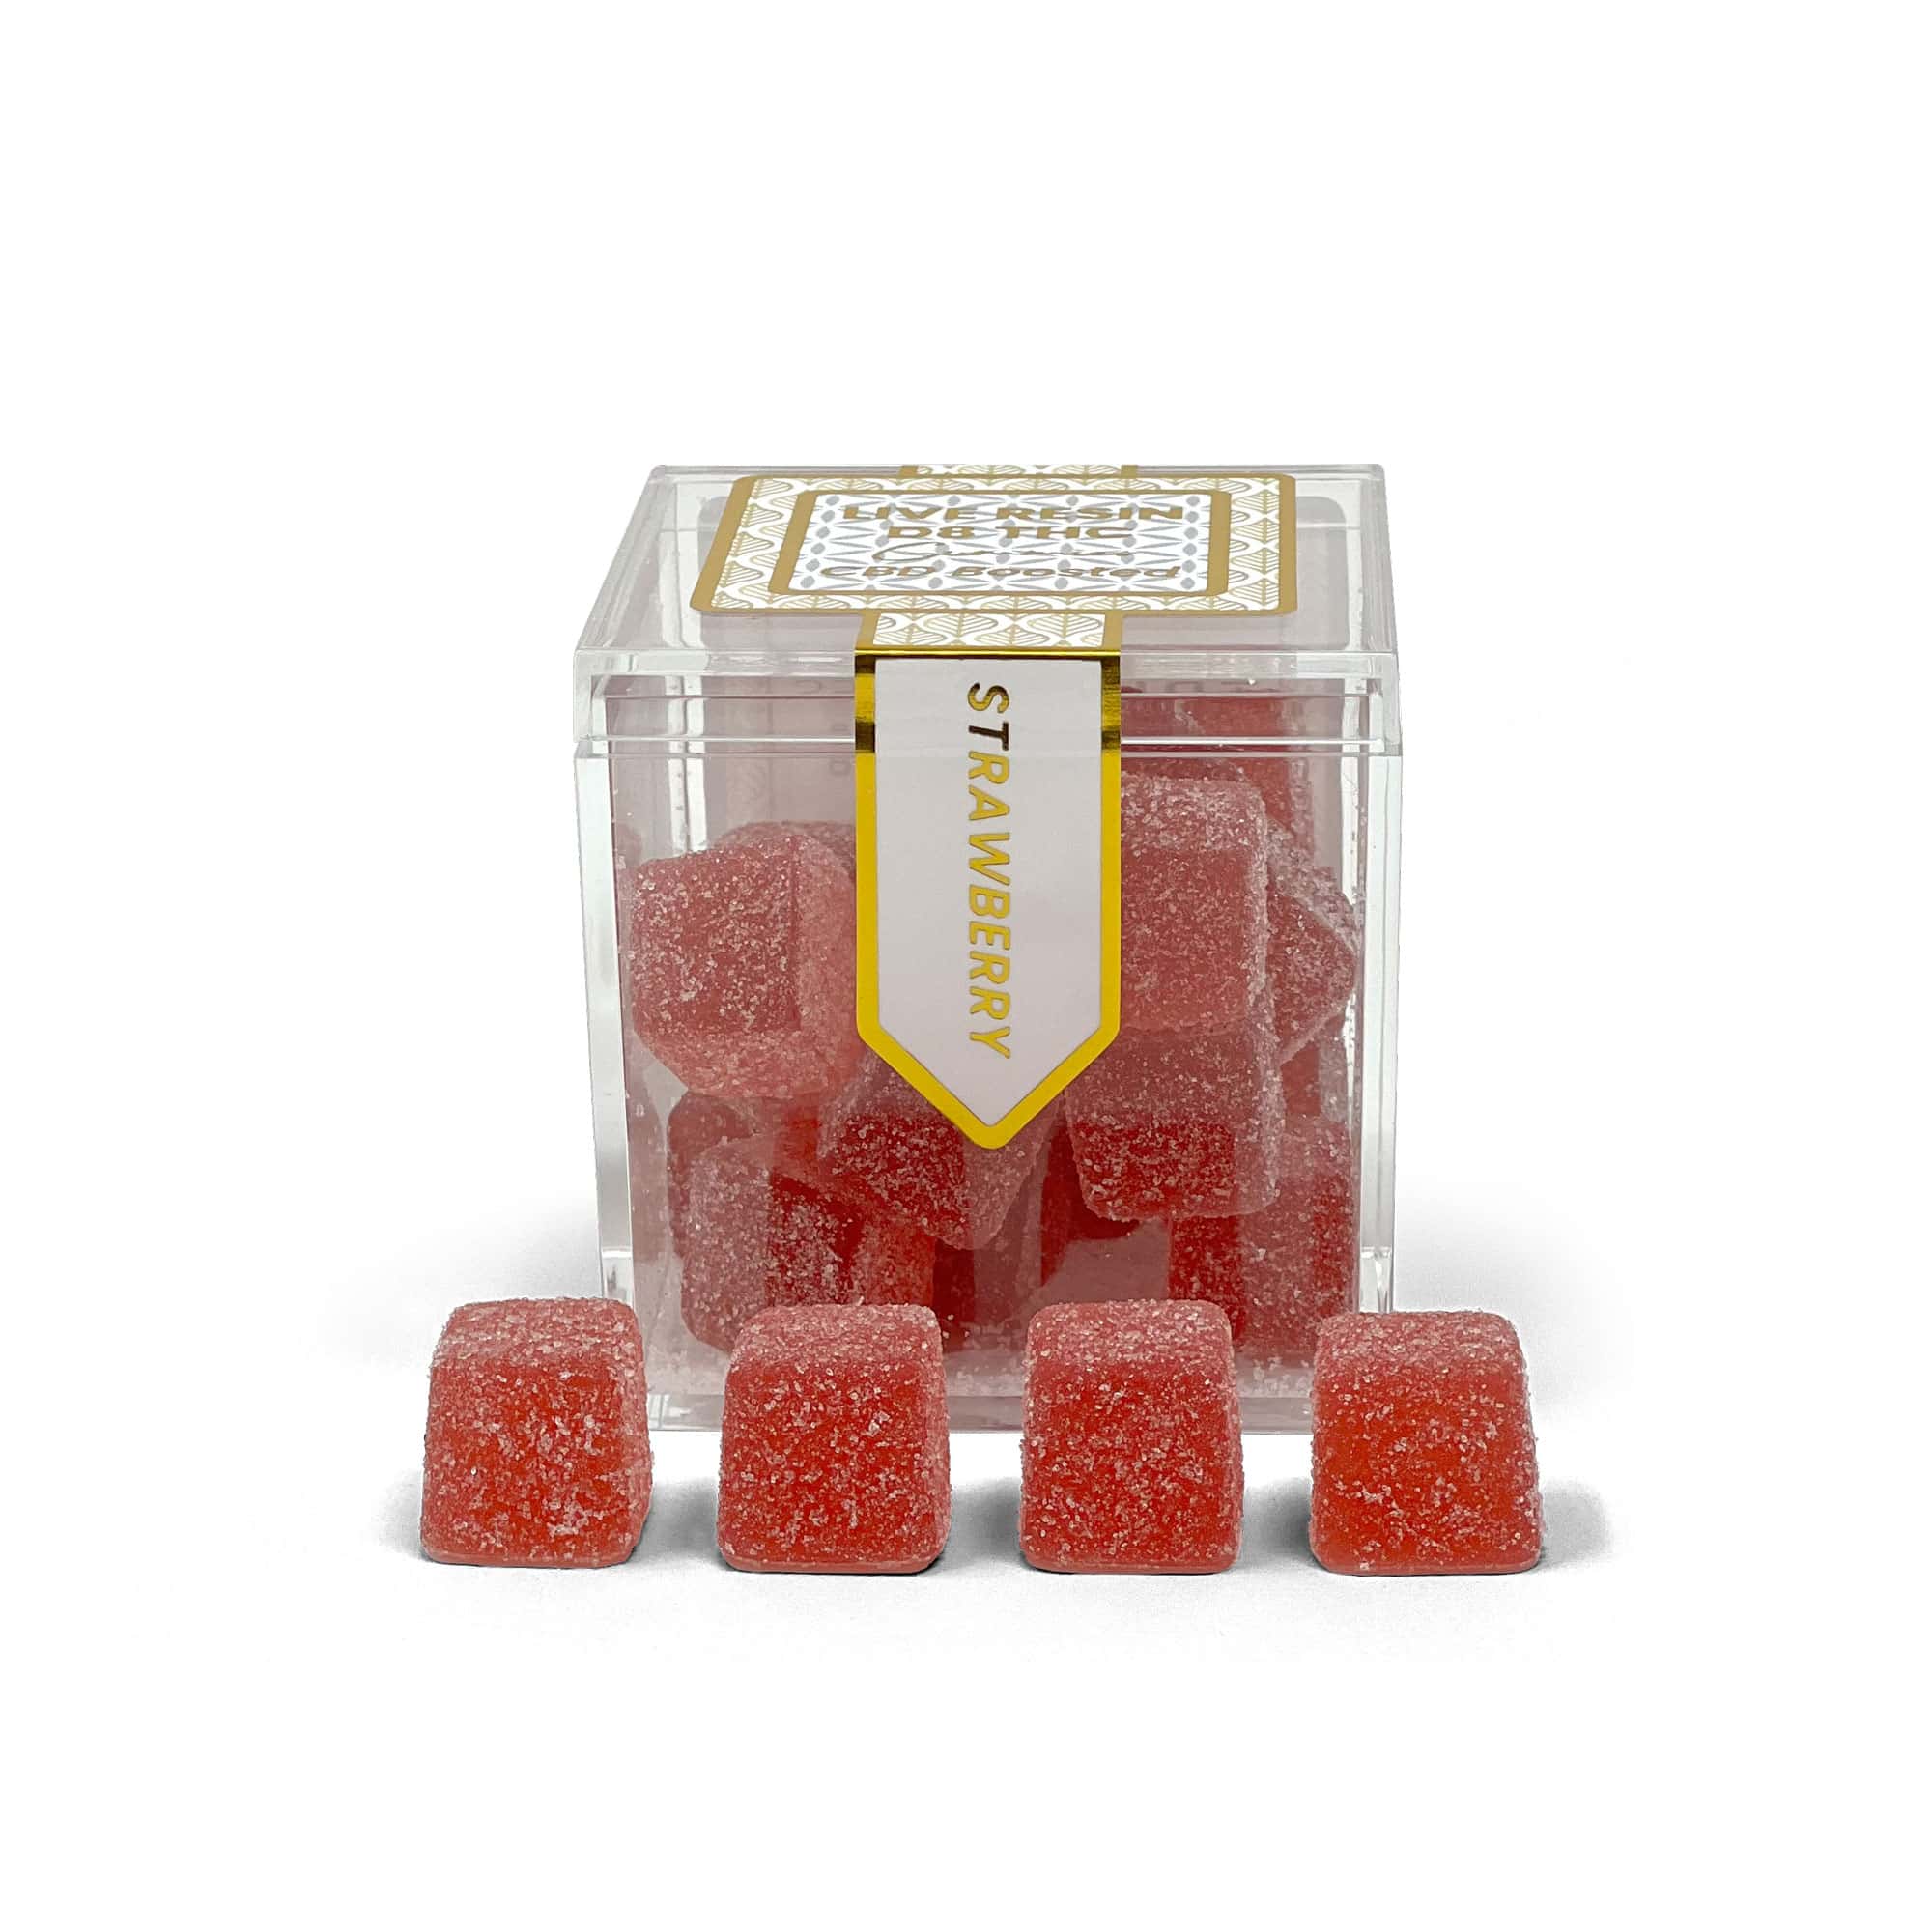 TribeTokes 3-Pack Live Resin Delta 8 THC Gummies | 600mg | CBD-Boosted | Strawberry (Save $20) Best Price